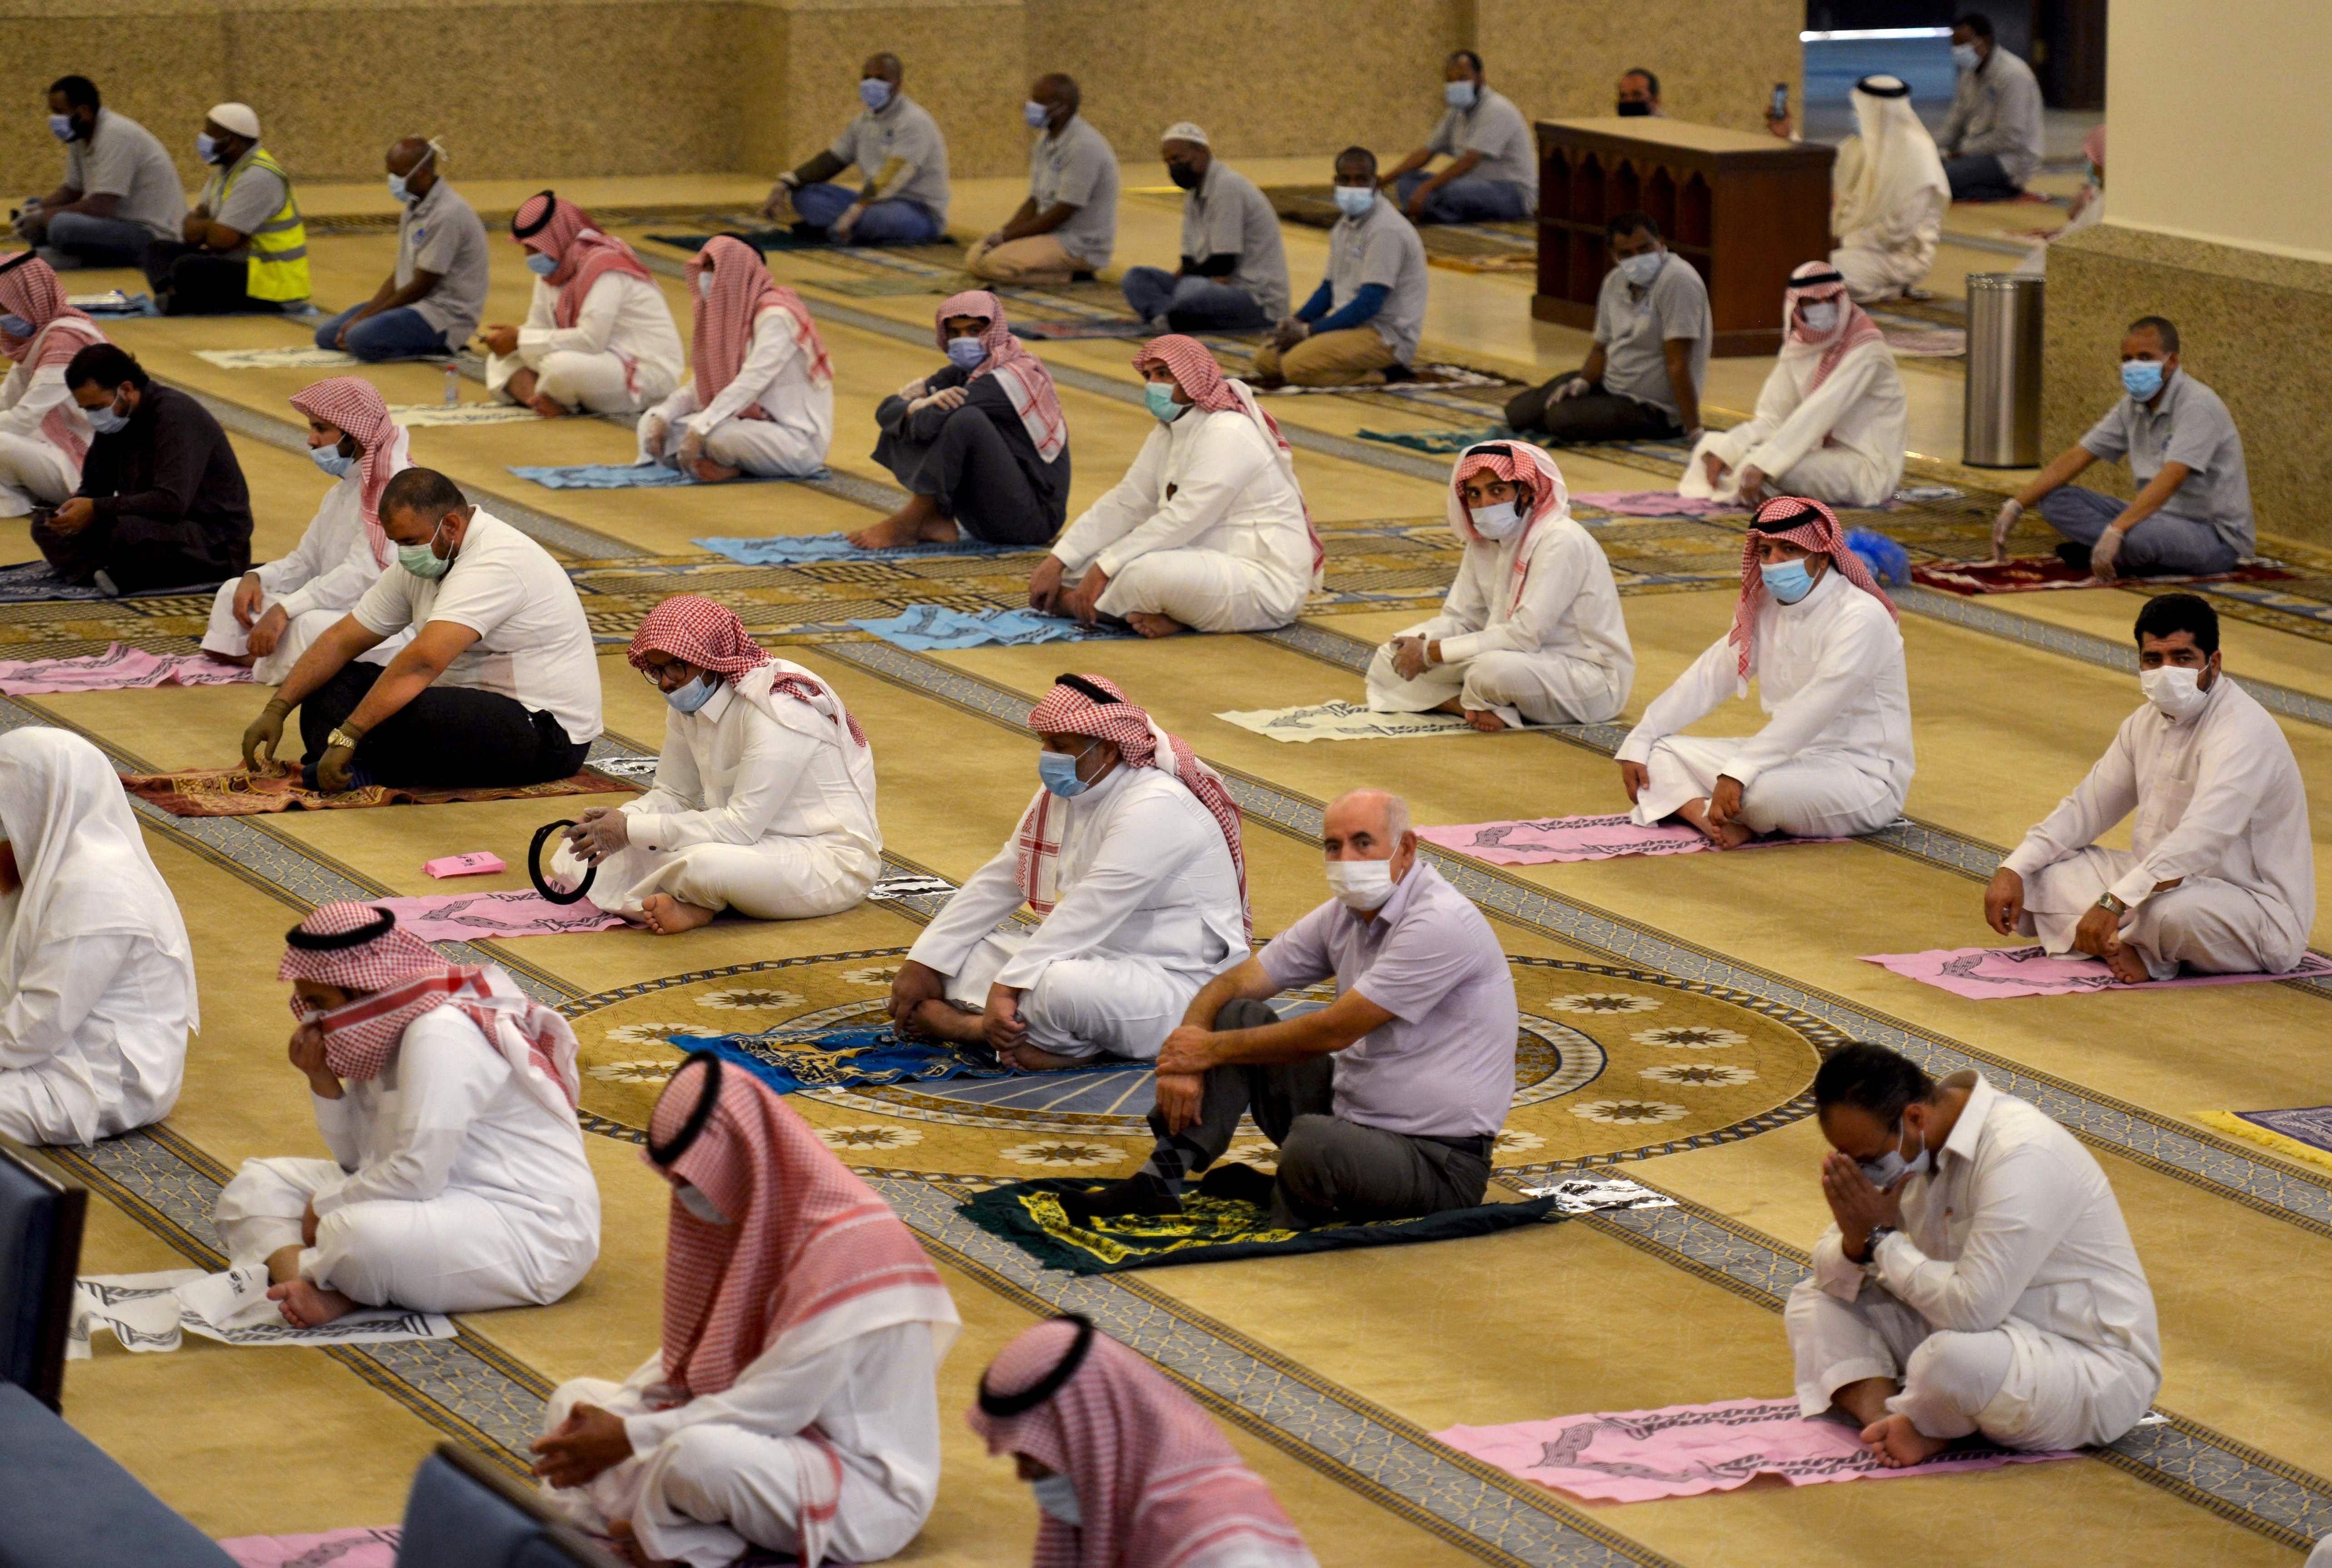 Saudi Muslims worshippers observe a safe distance as they perform noon prayer at Al-Rajhi mosque in the capital Riyadh. (AFP photo)